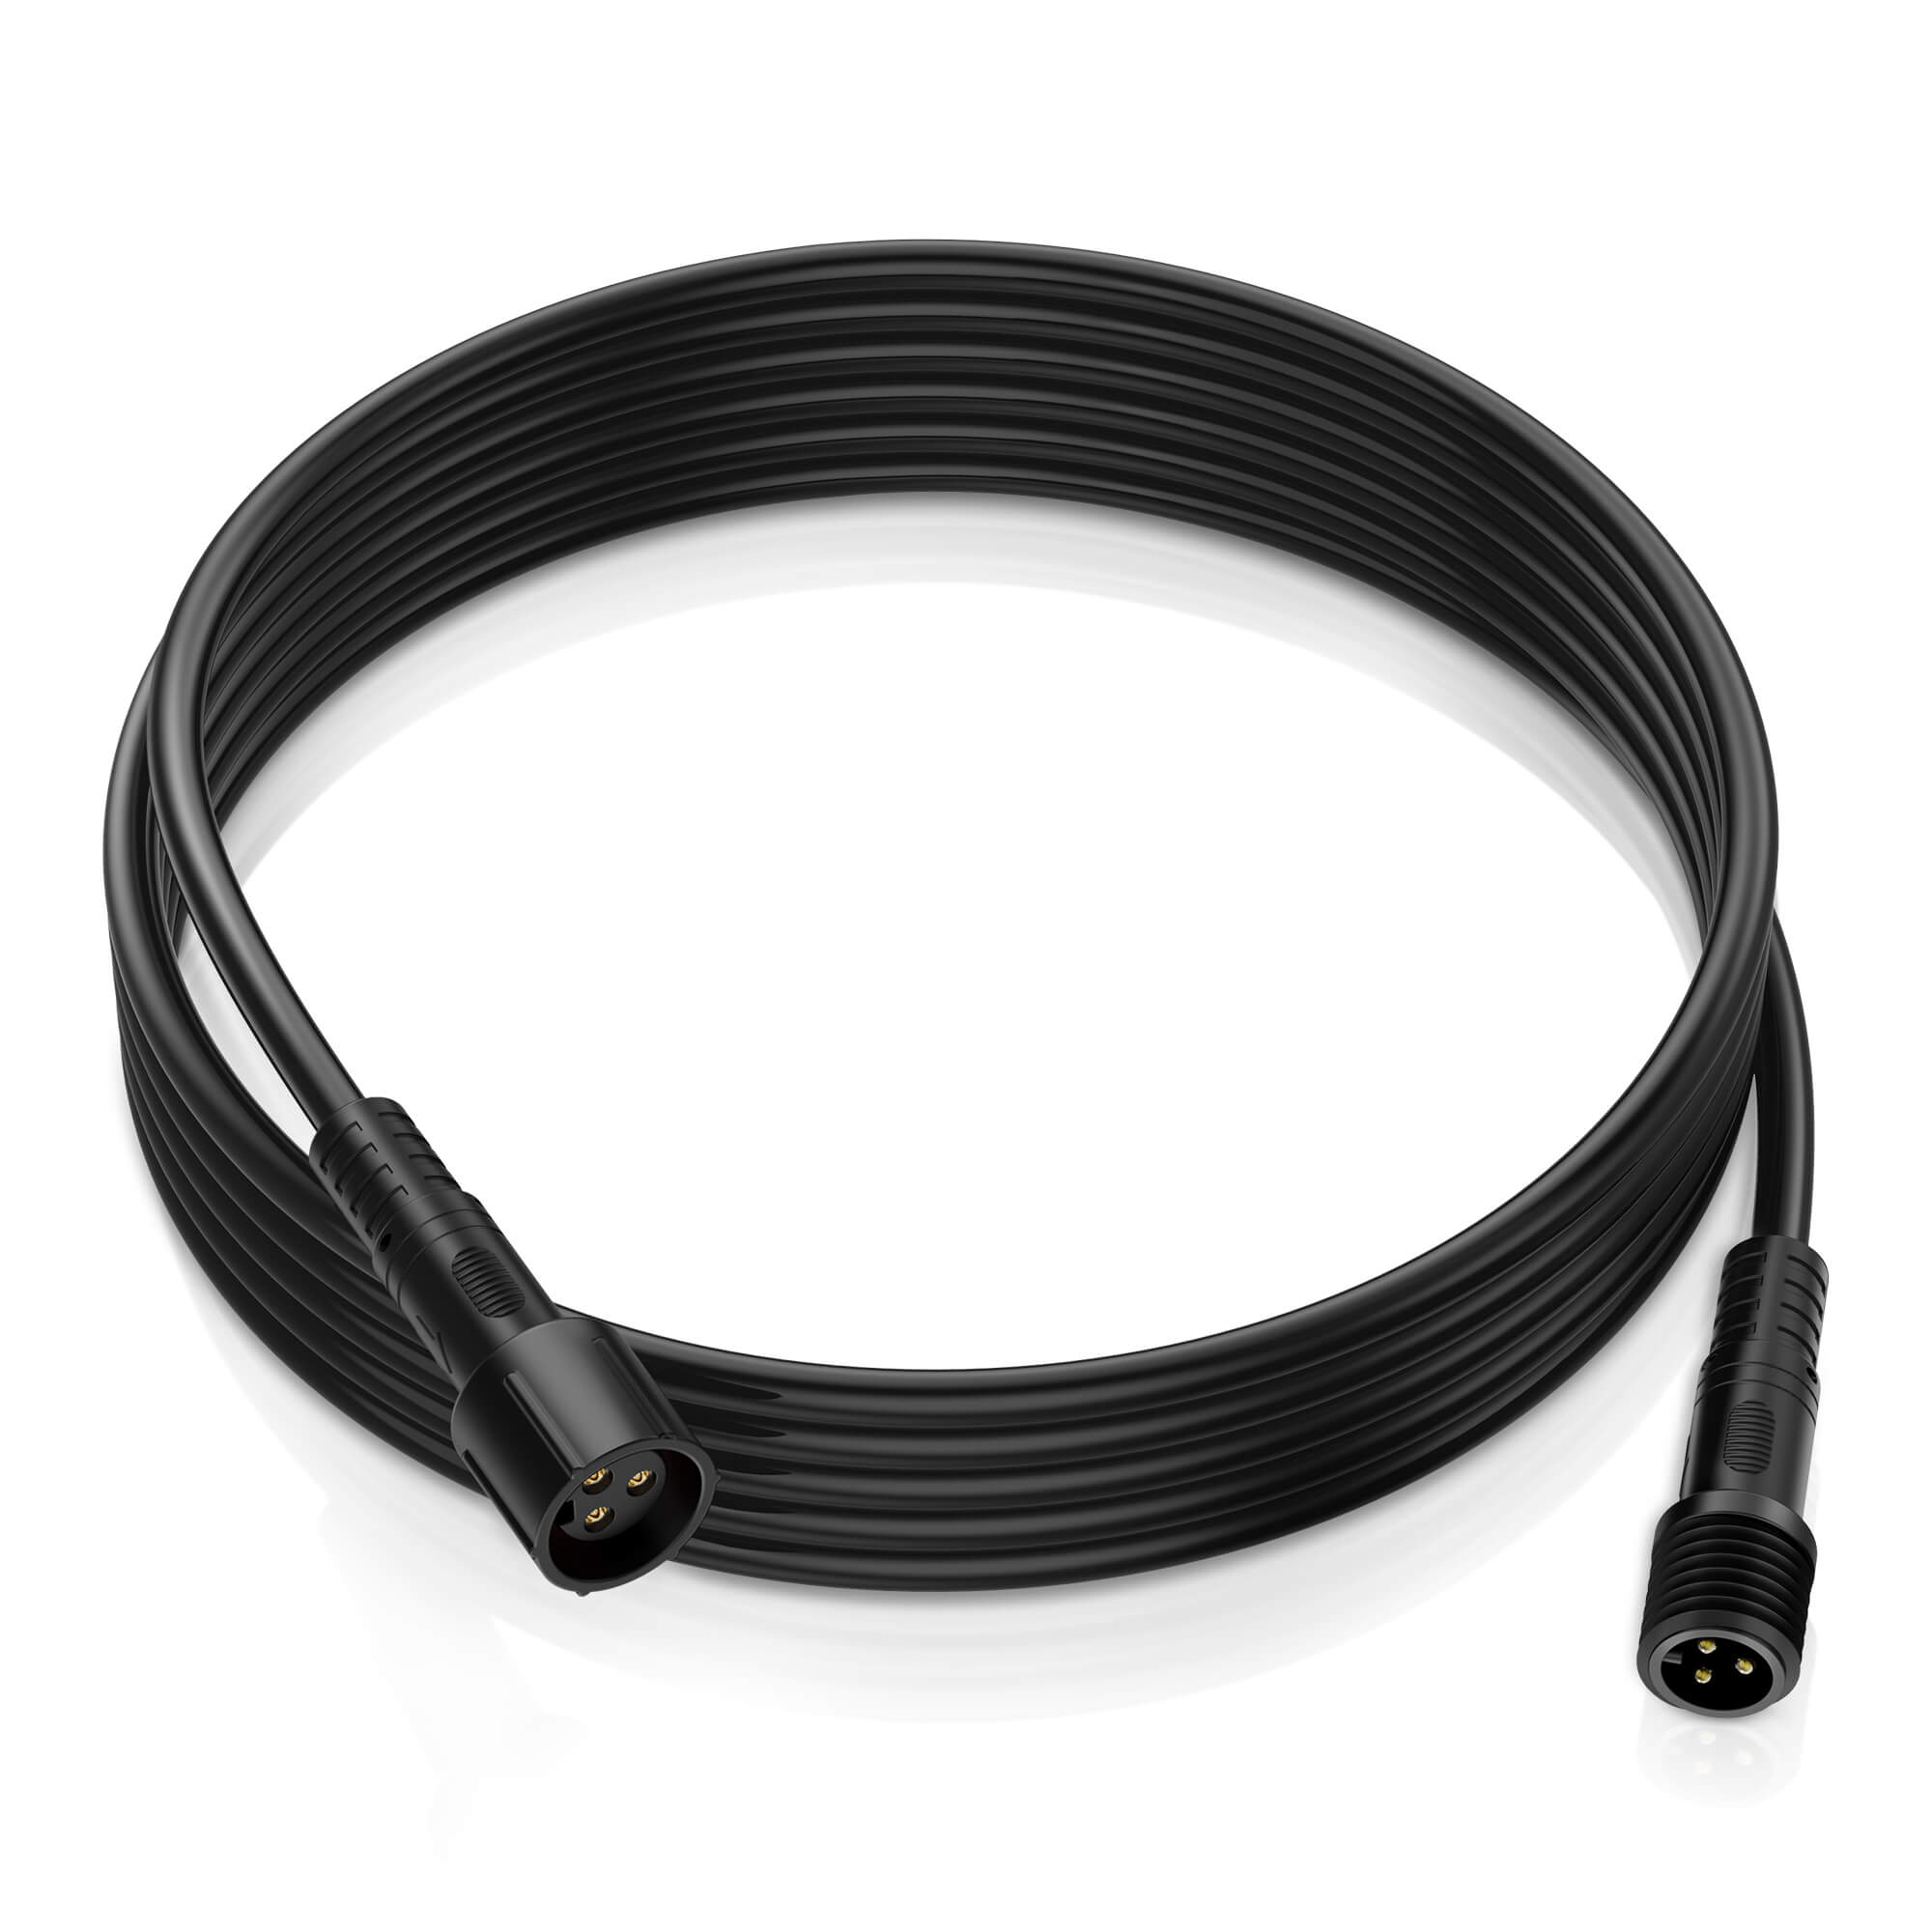 6.56FT 3-Pin Extension Cord Wire Cable for RGB+IC C2, V1, W1 Series Lights and P1s Switch Panel